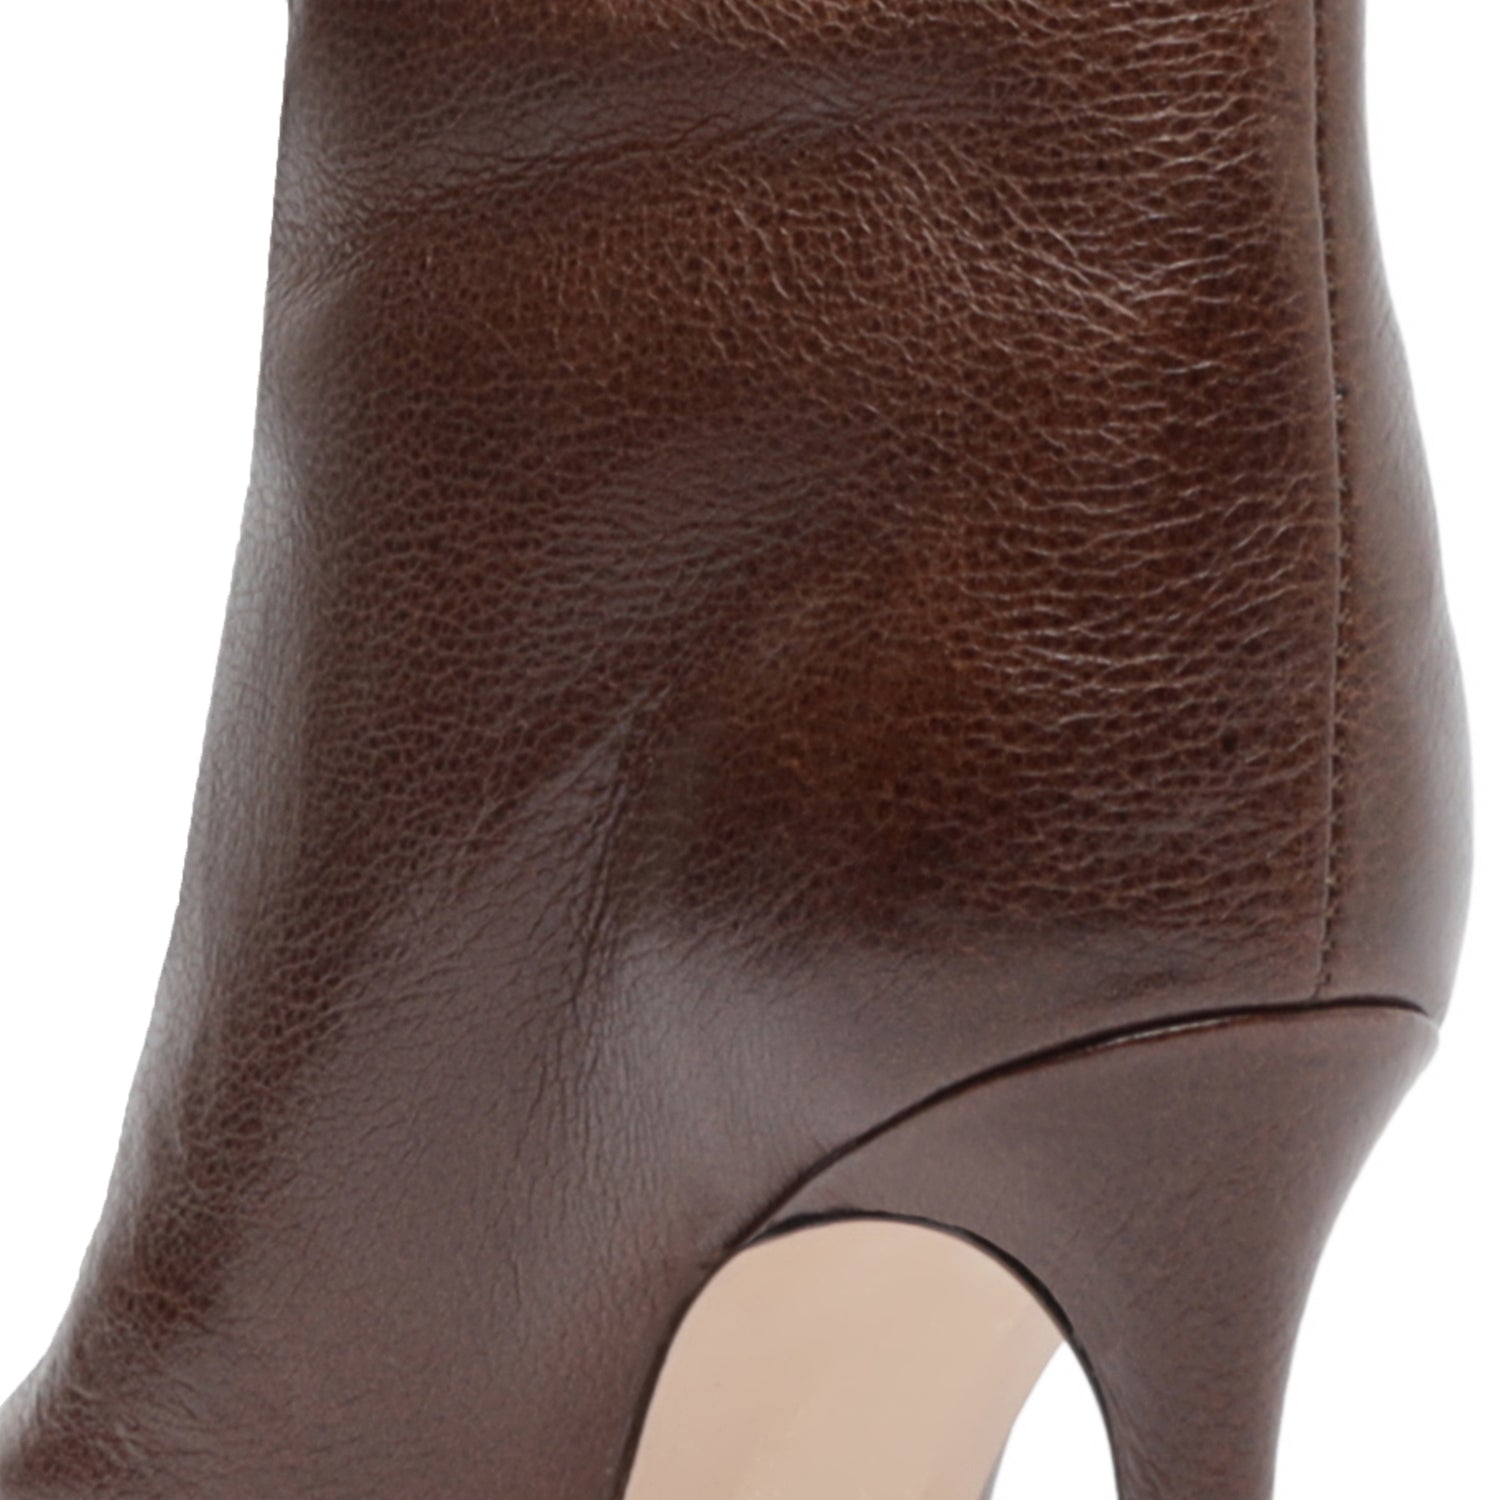 Maryana Leather Boot Brown Leather